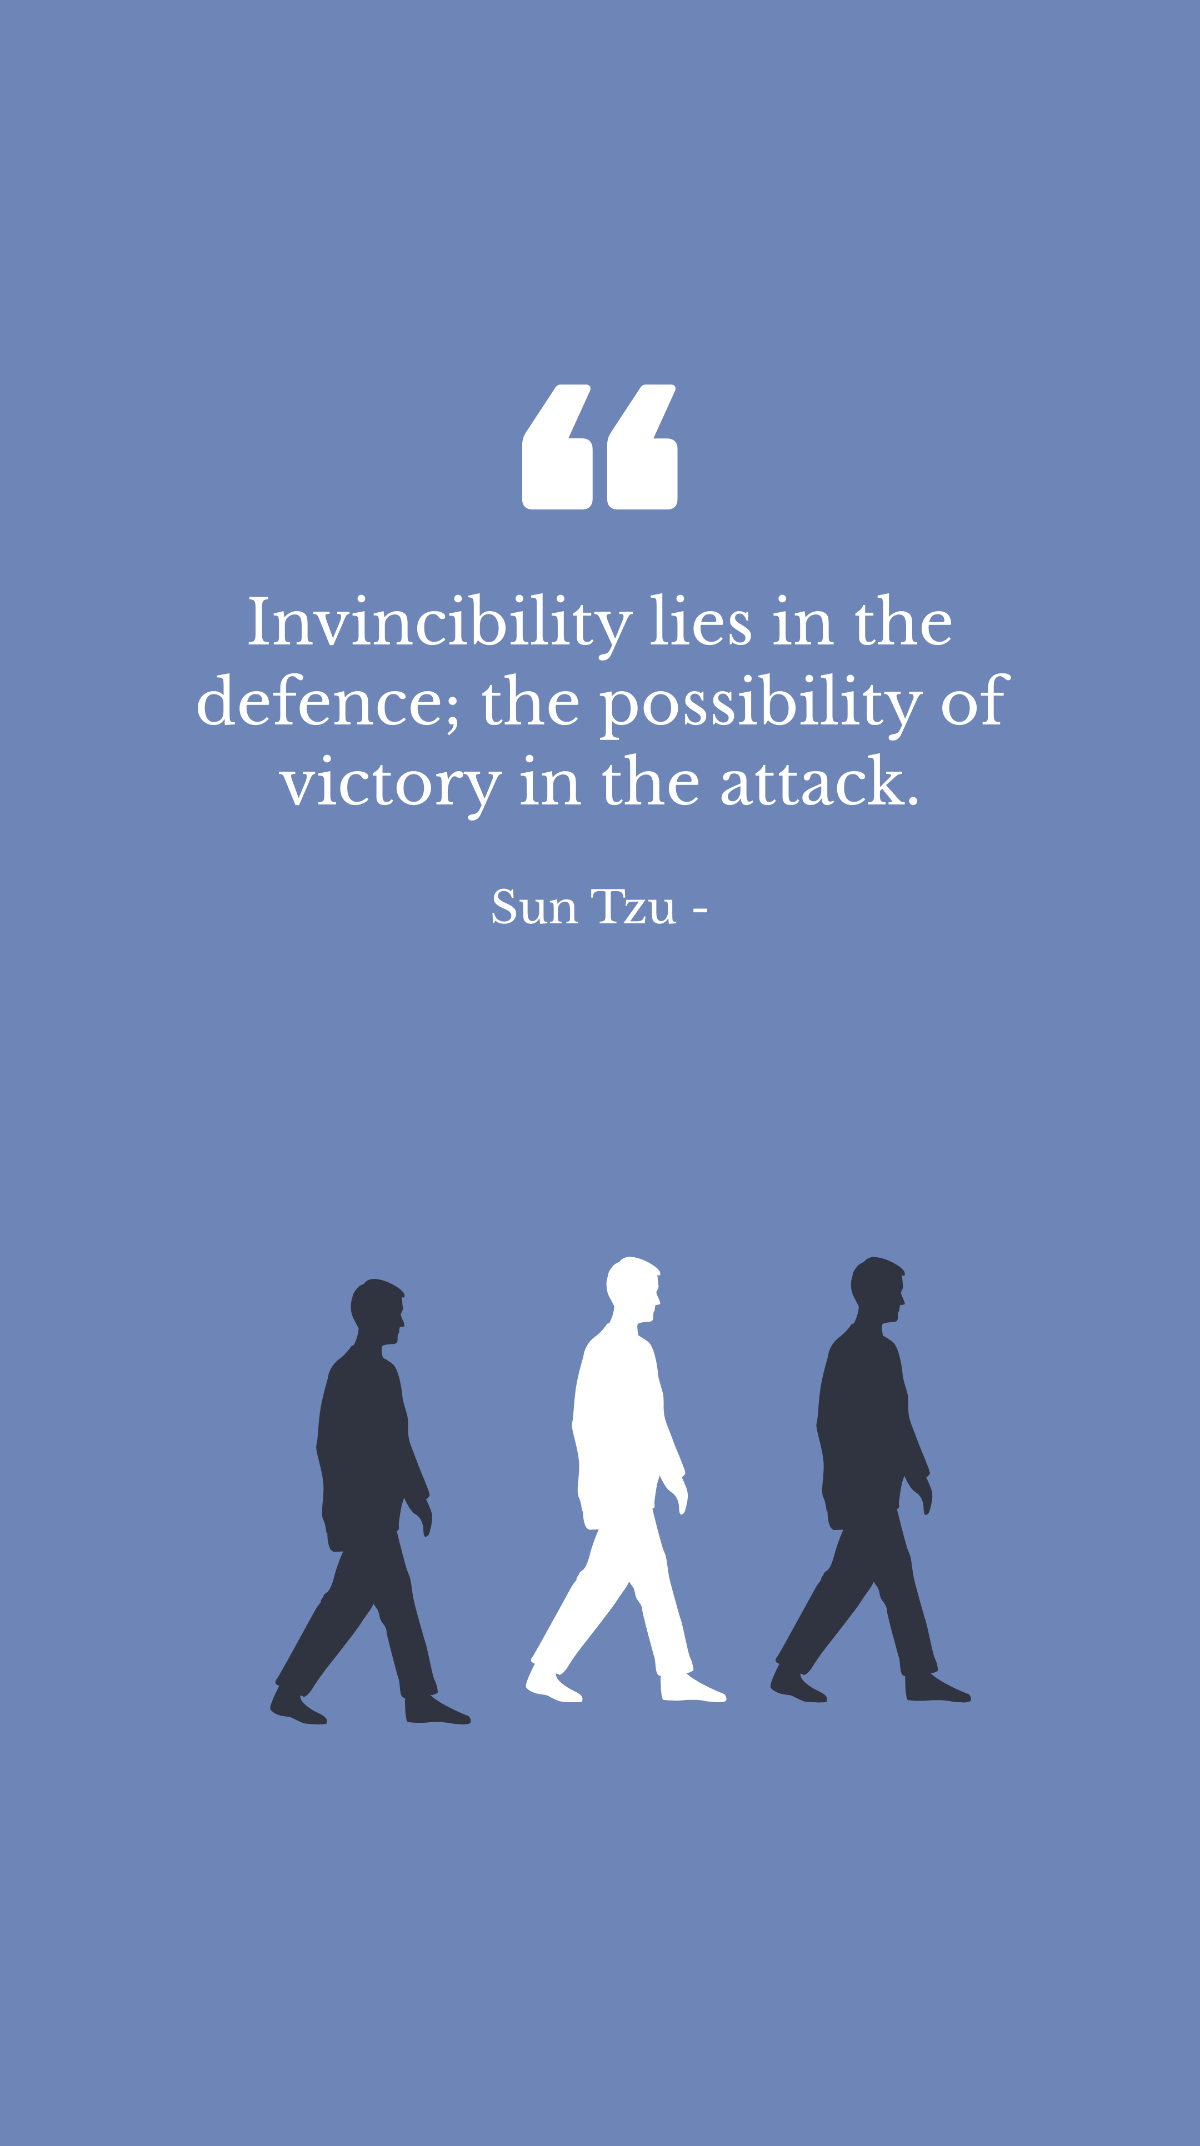 Sun Tzu - Invincibility lies in the defence; the possibility of victory in the attack.